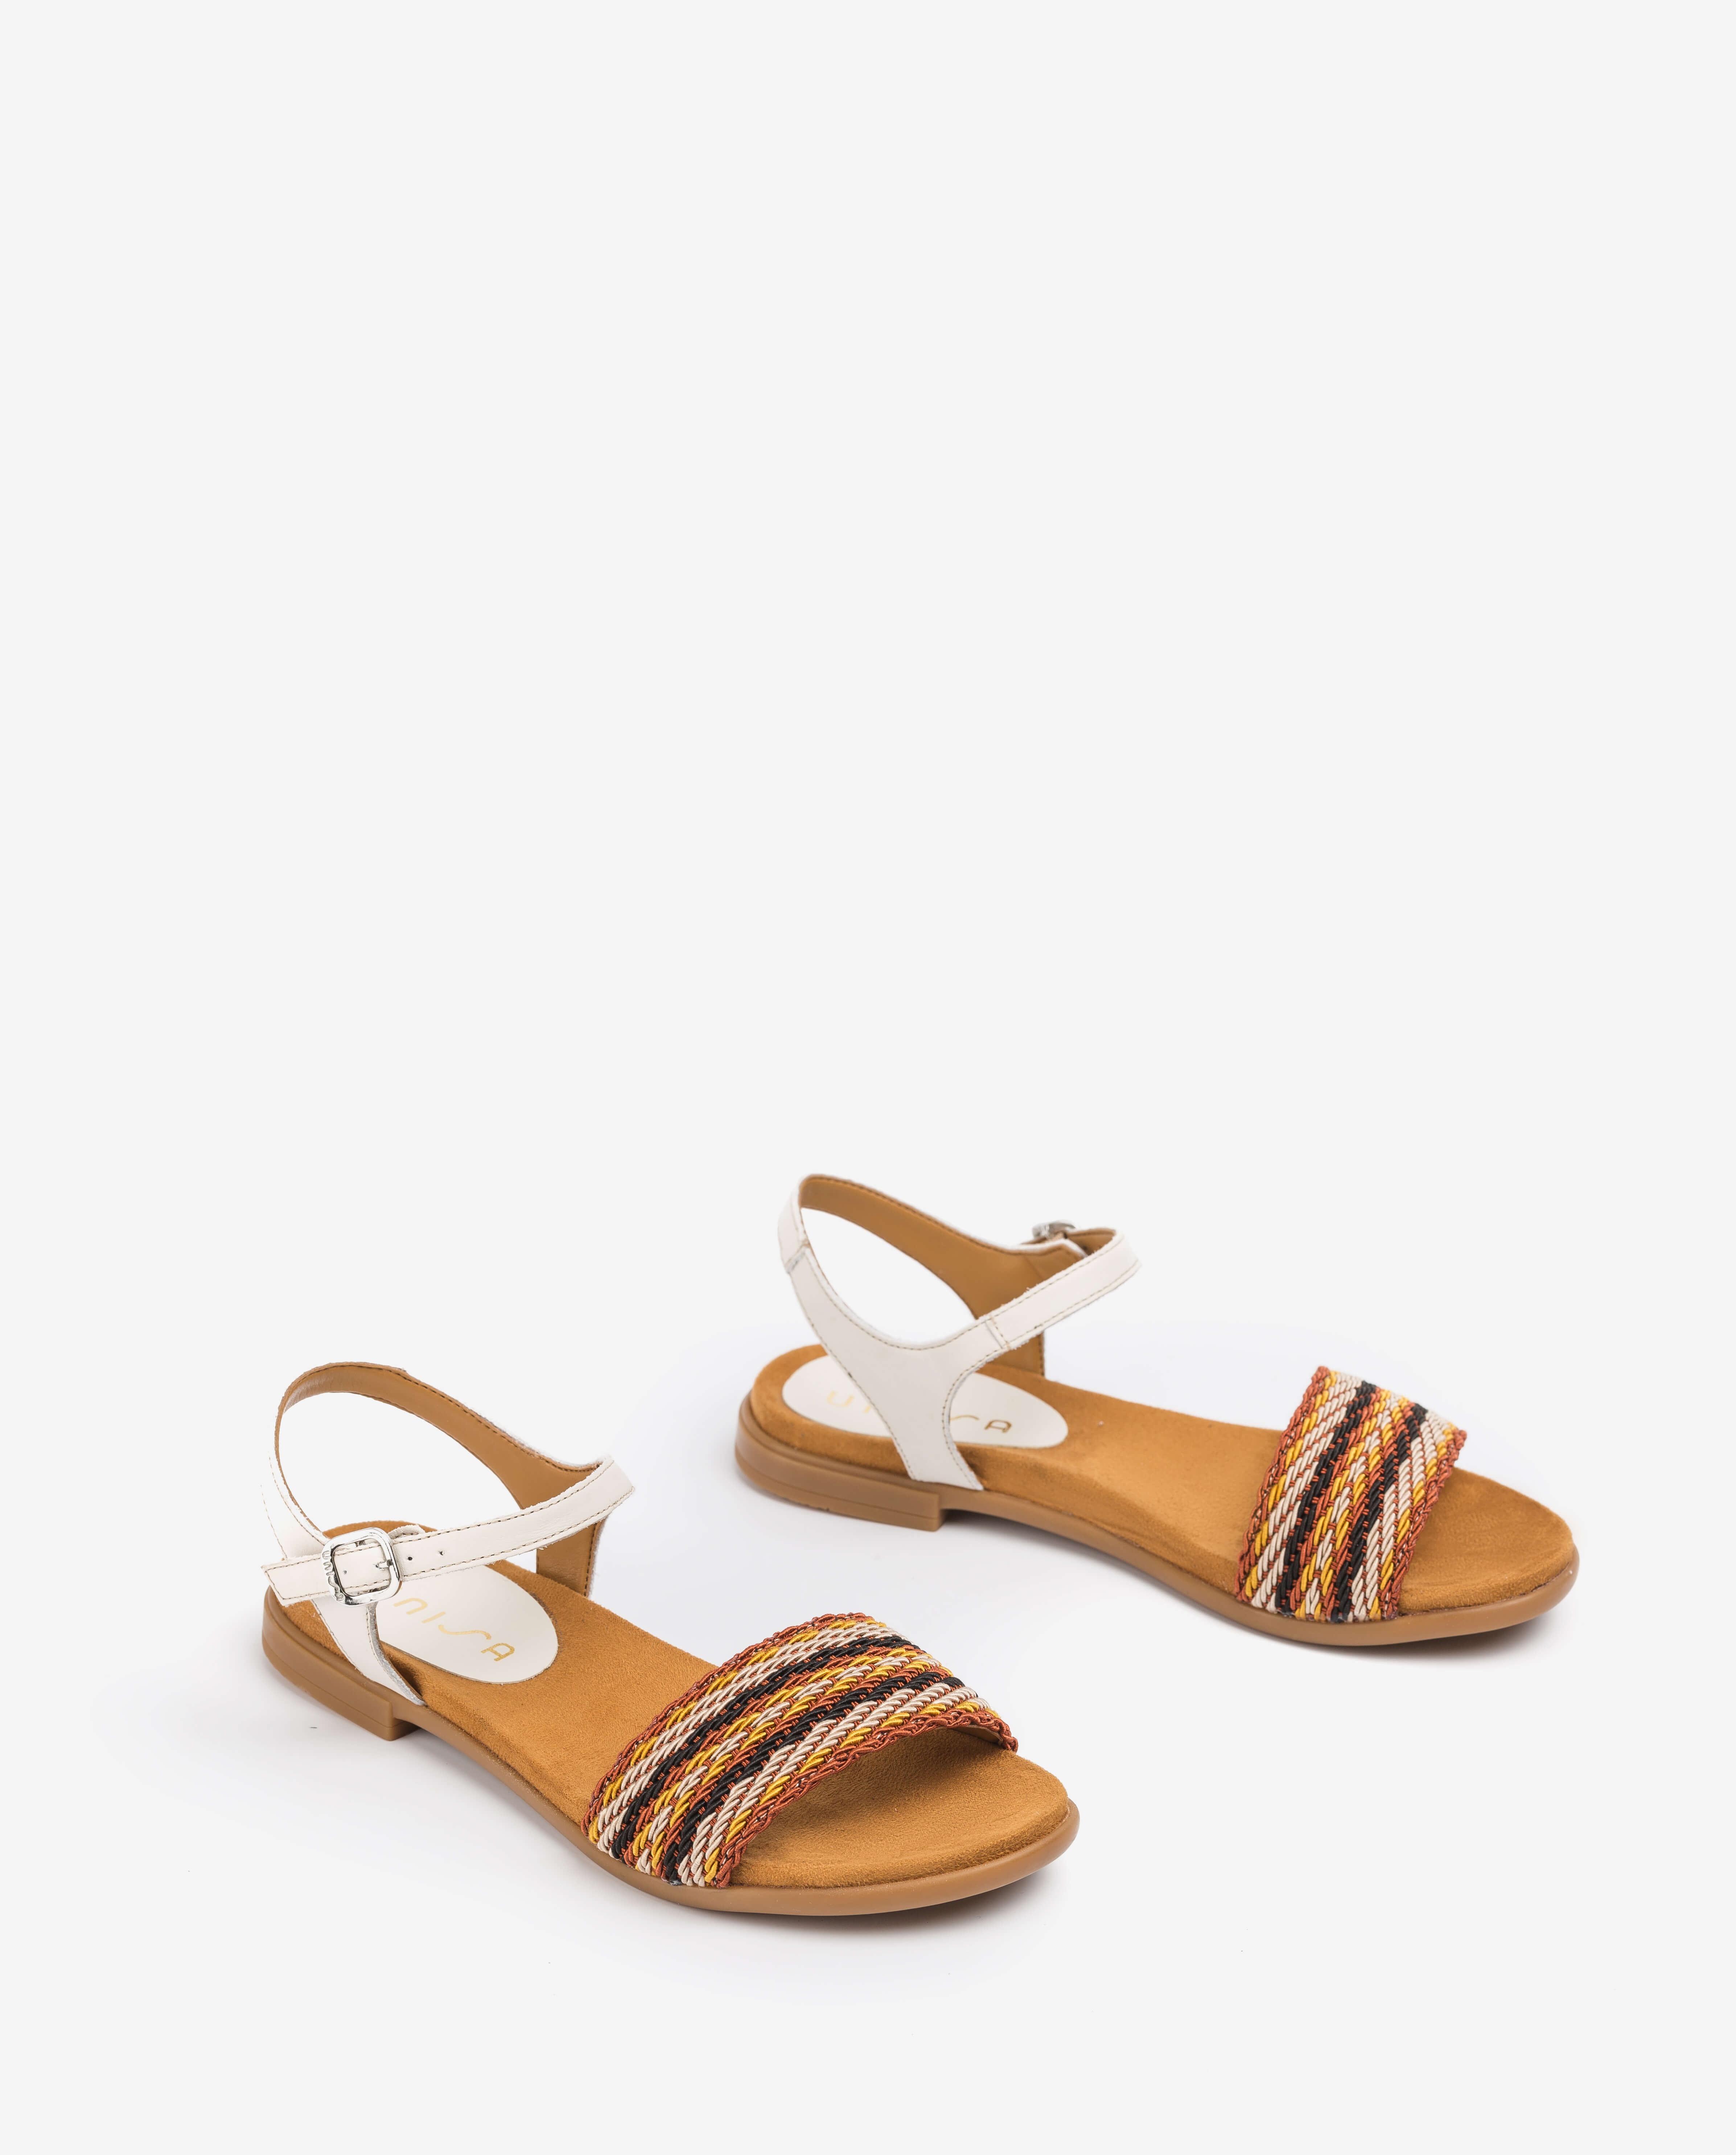 UNISA Sandale fille mule tressagee LINTA_NF_CAN ivory 3